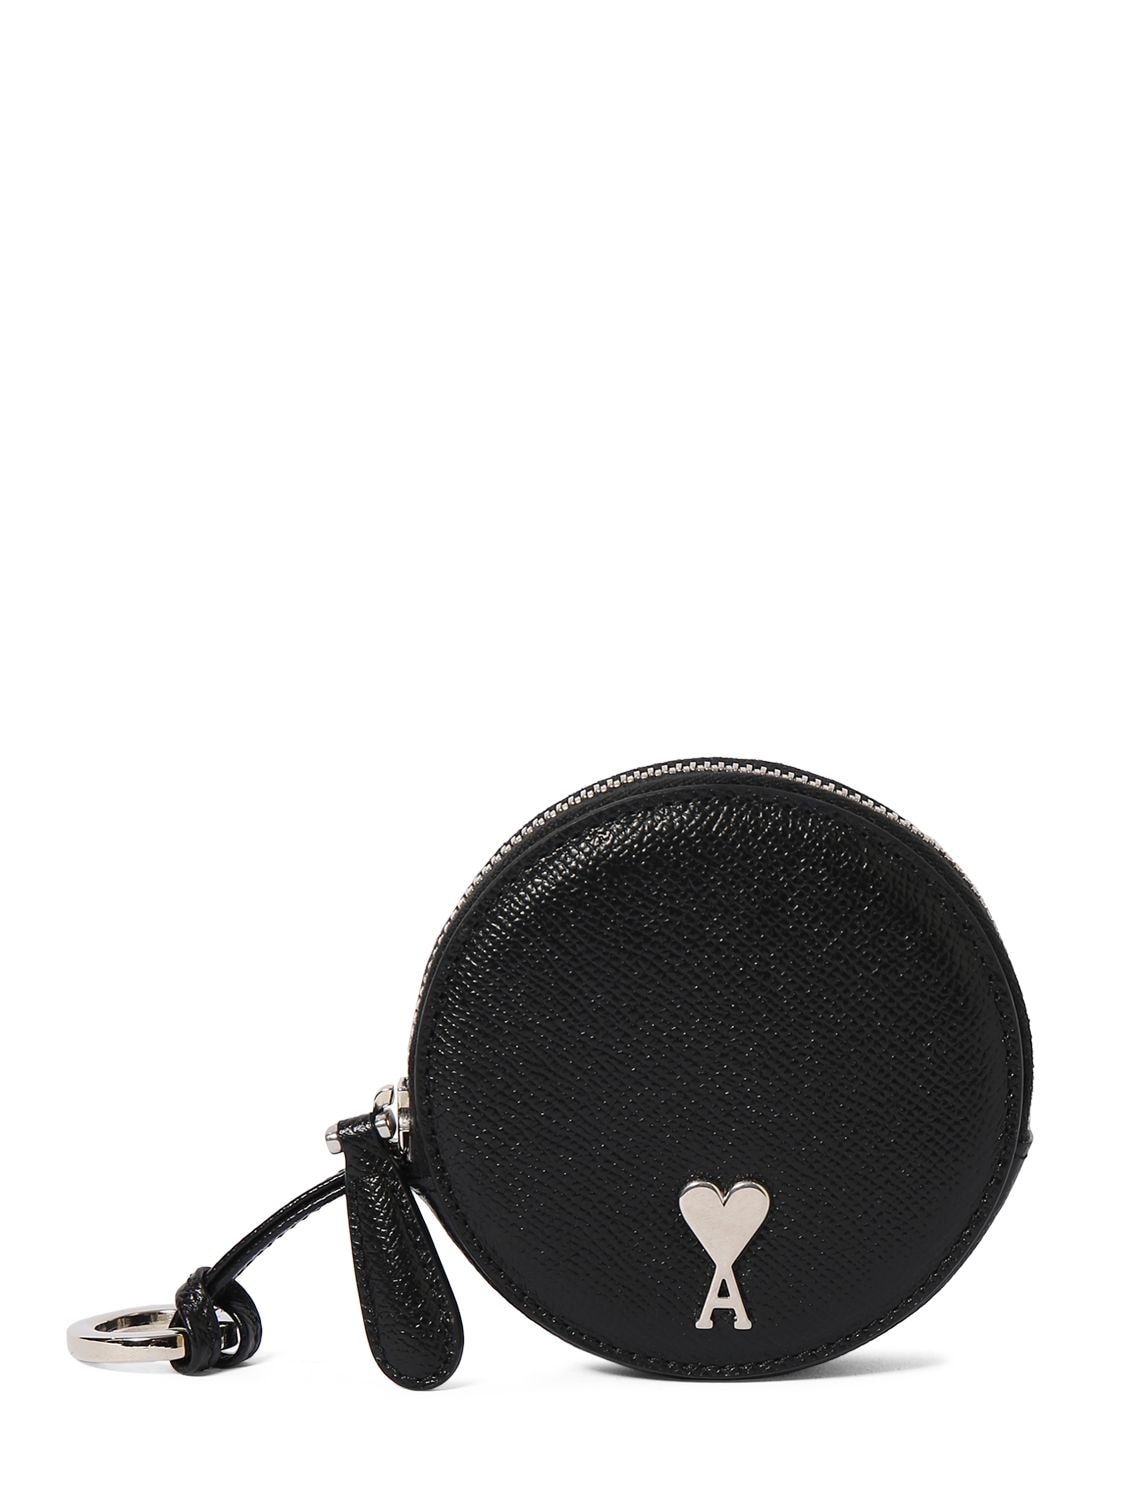 Image of Adc Zip Coin Purse